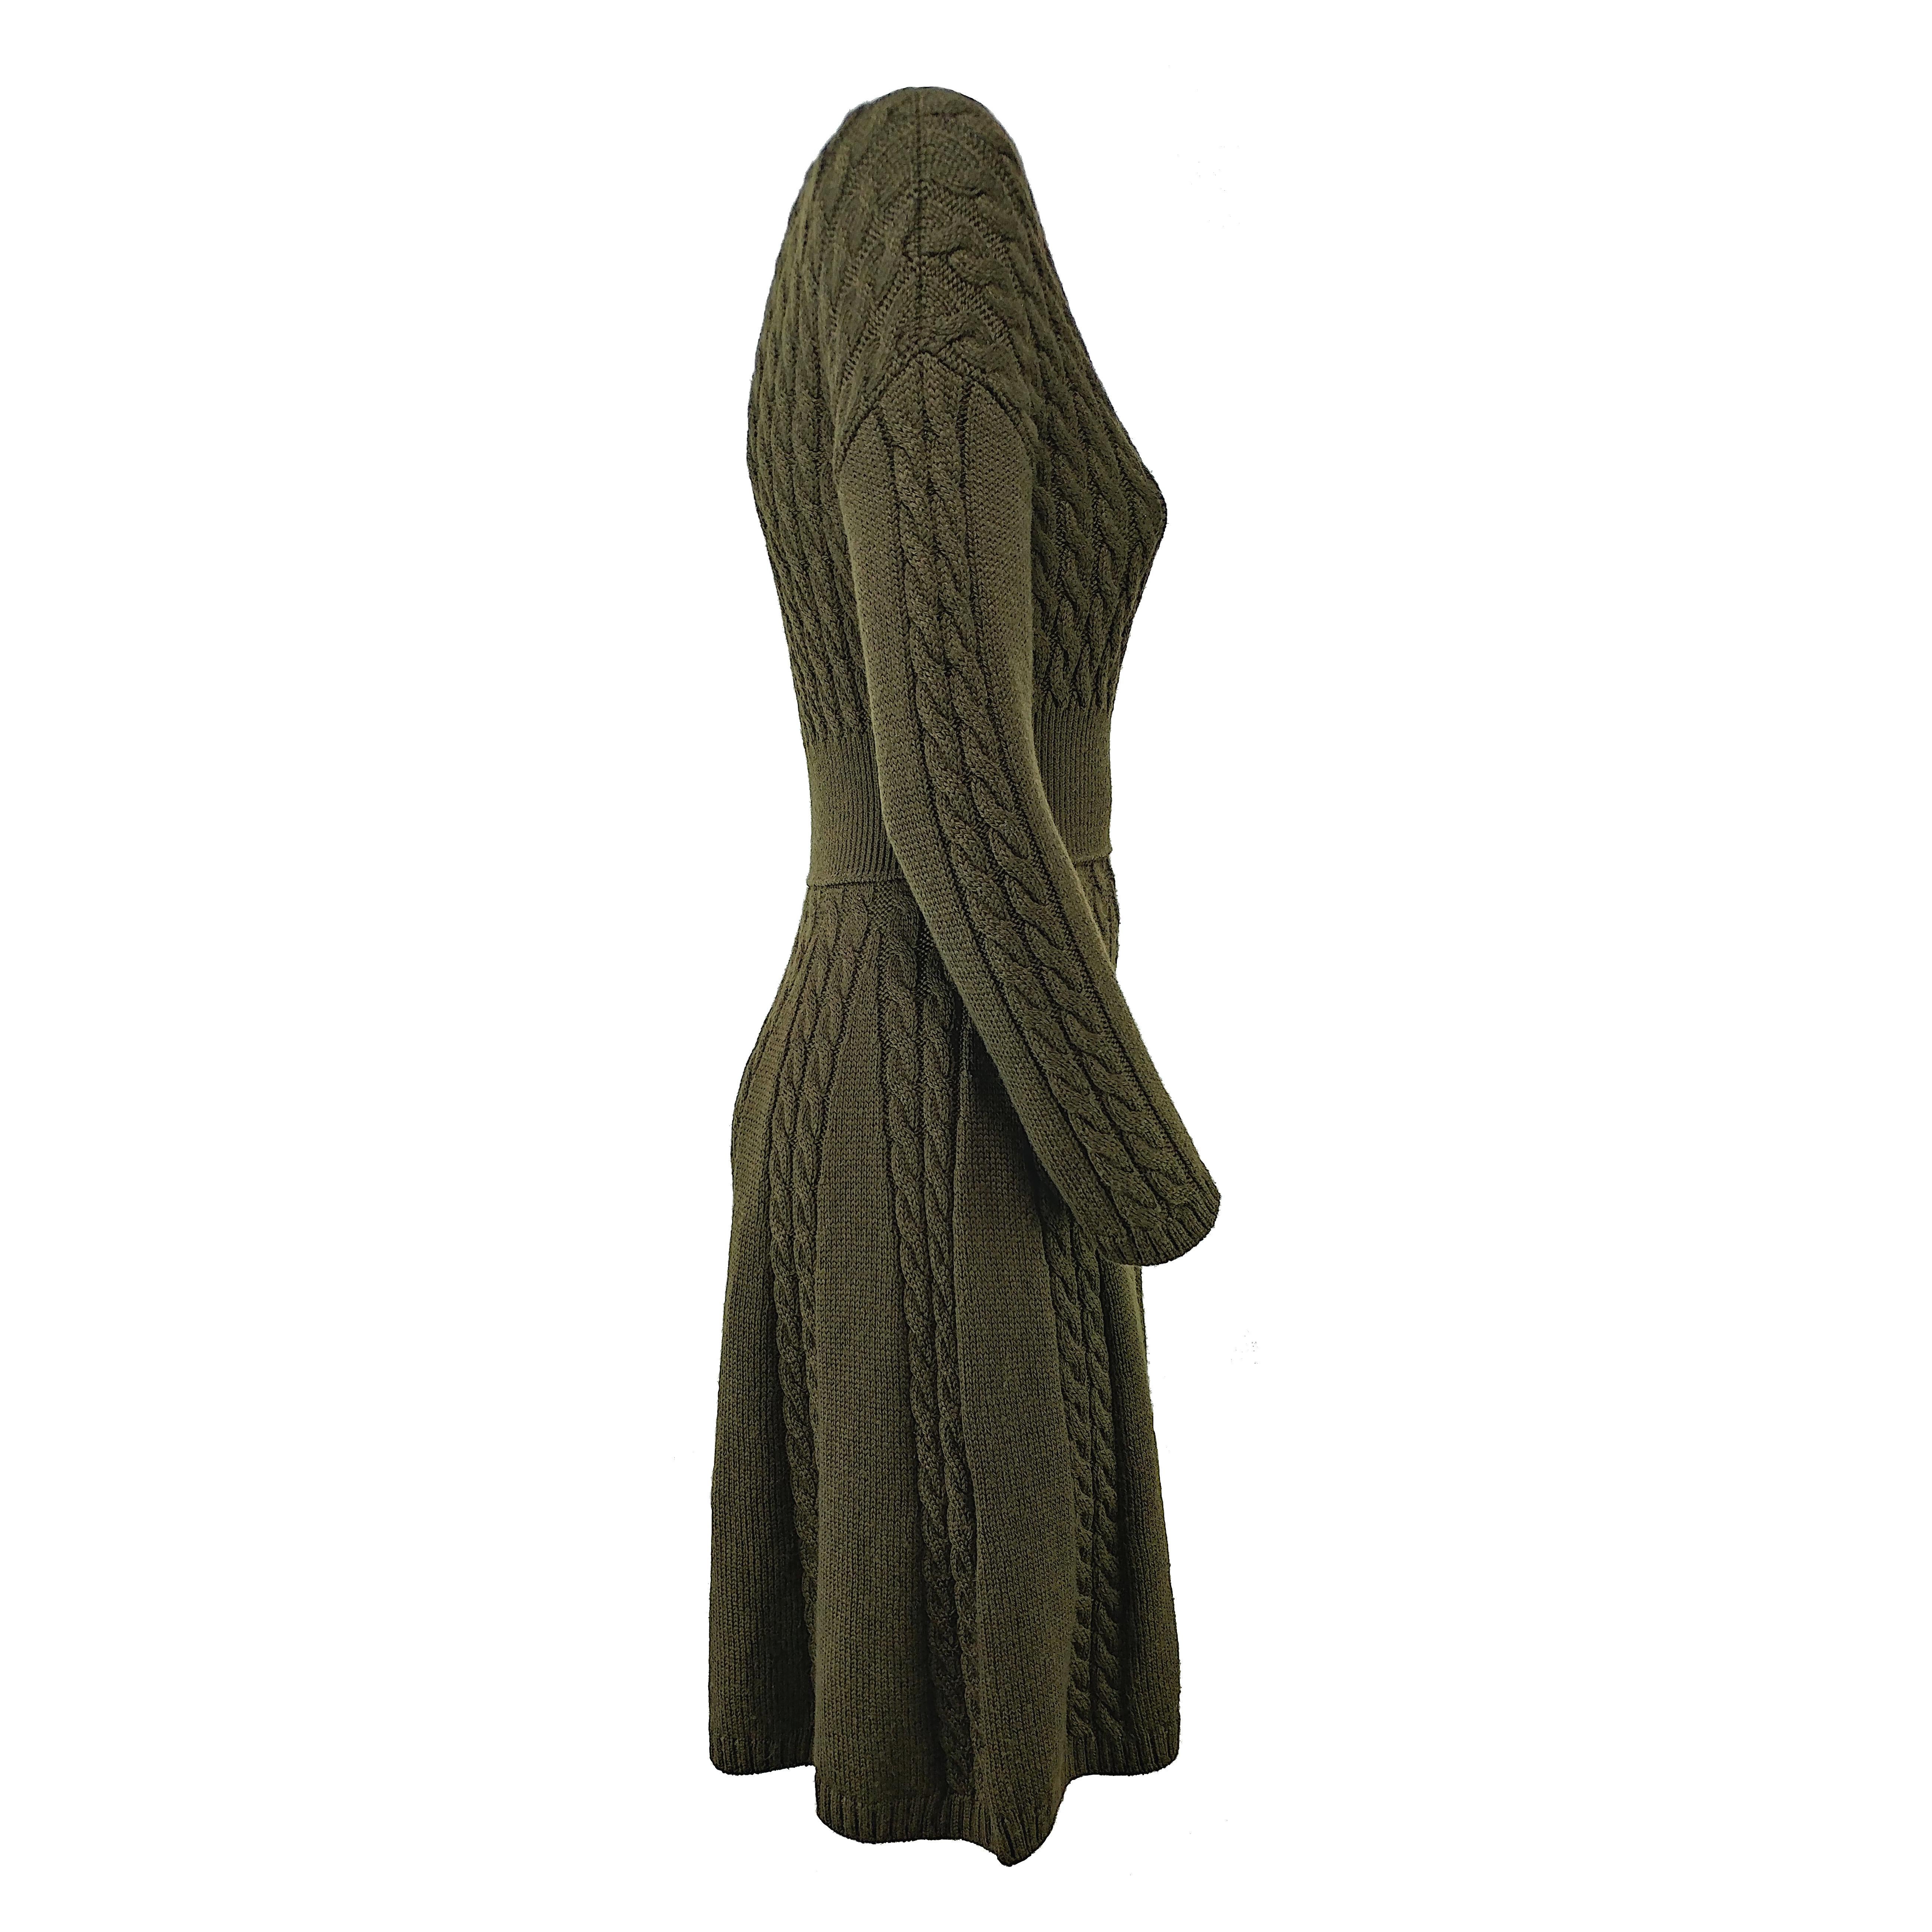 Following Prada's sleek yet iconic style, this long-sleeve dress arrives in an olive green hue. Crafted in Italy from pure wool, its top elegantly clings to the body, before falling with a draped midi skirt. It has been worn only a few times and it